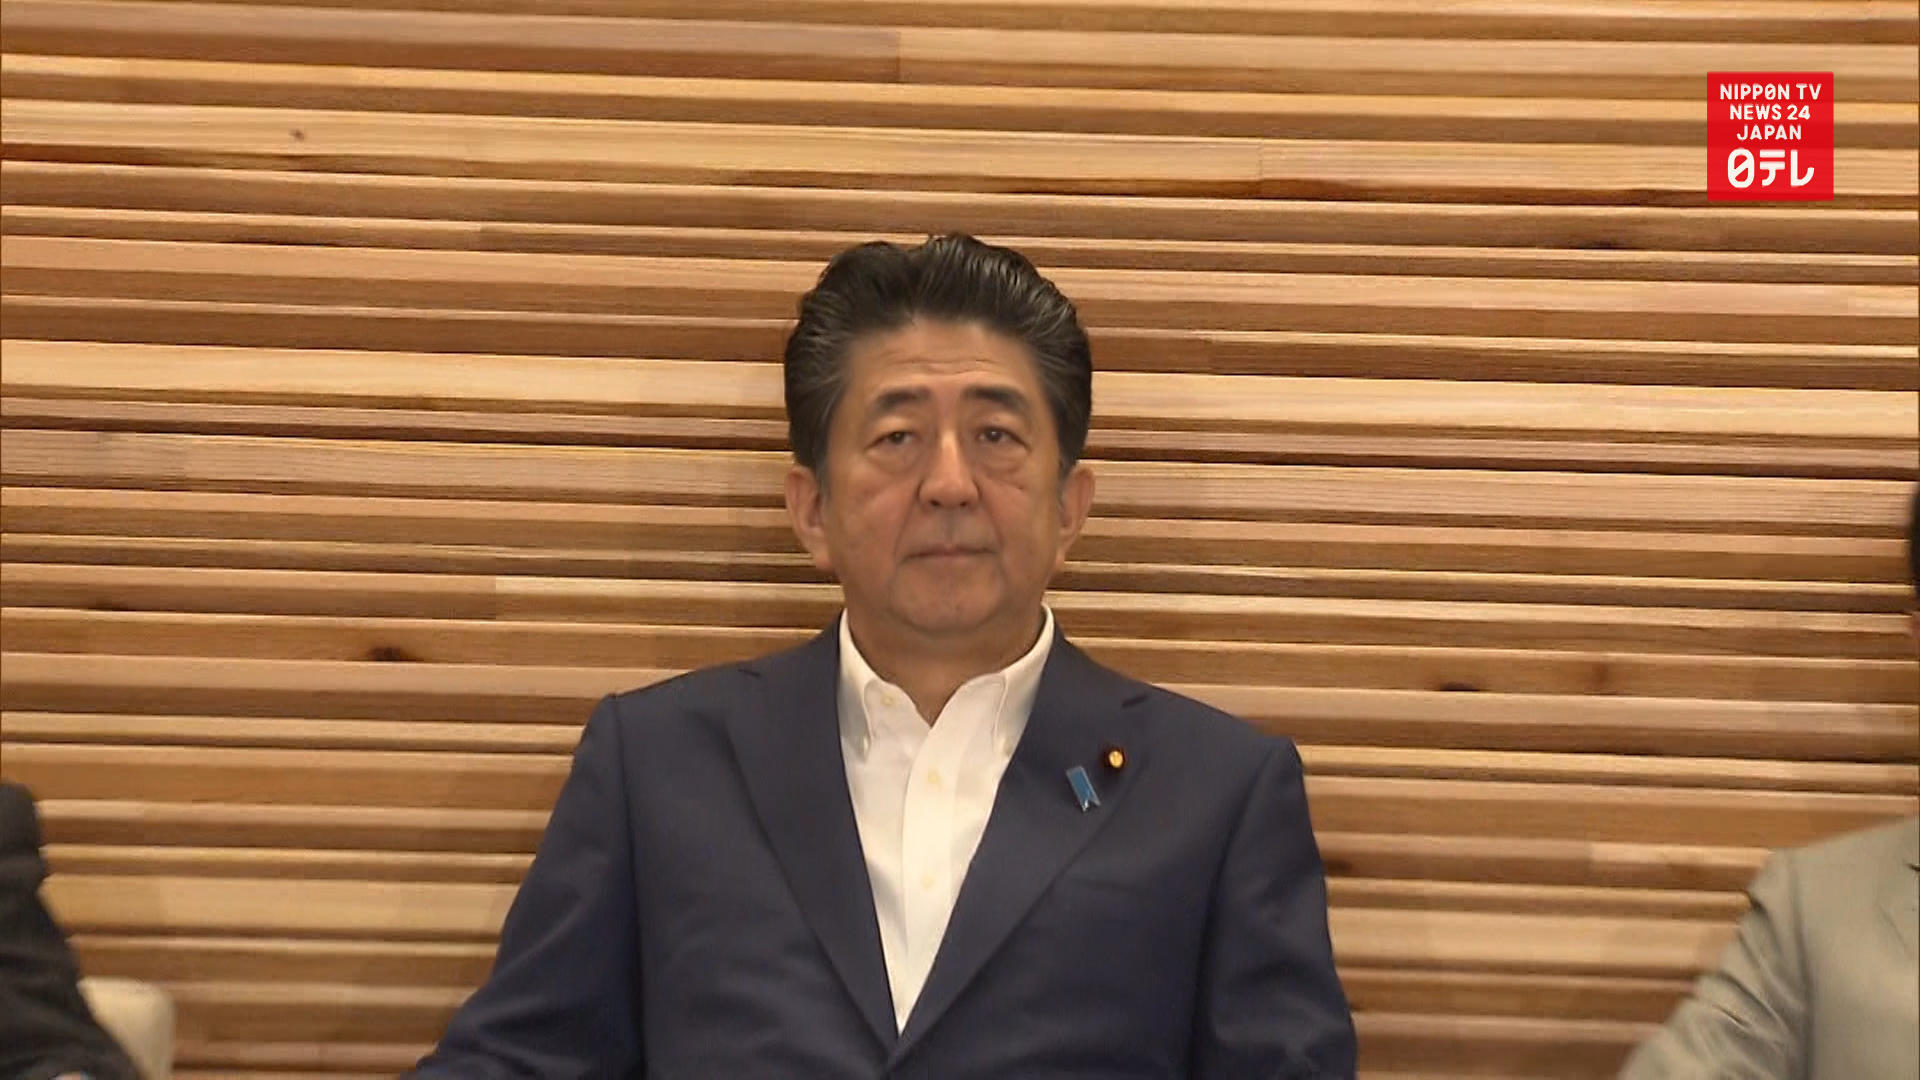 Abe rejects S. Korean proposal, relations remain tense